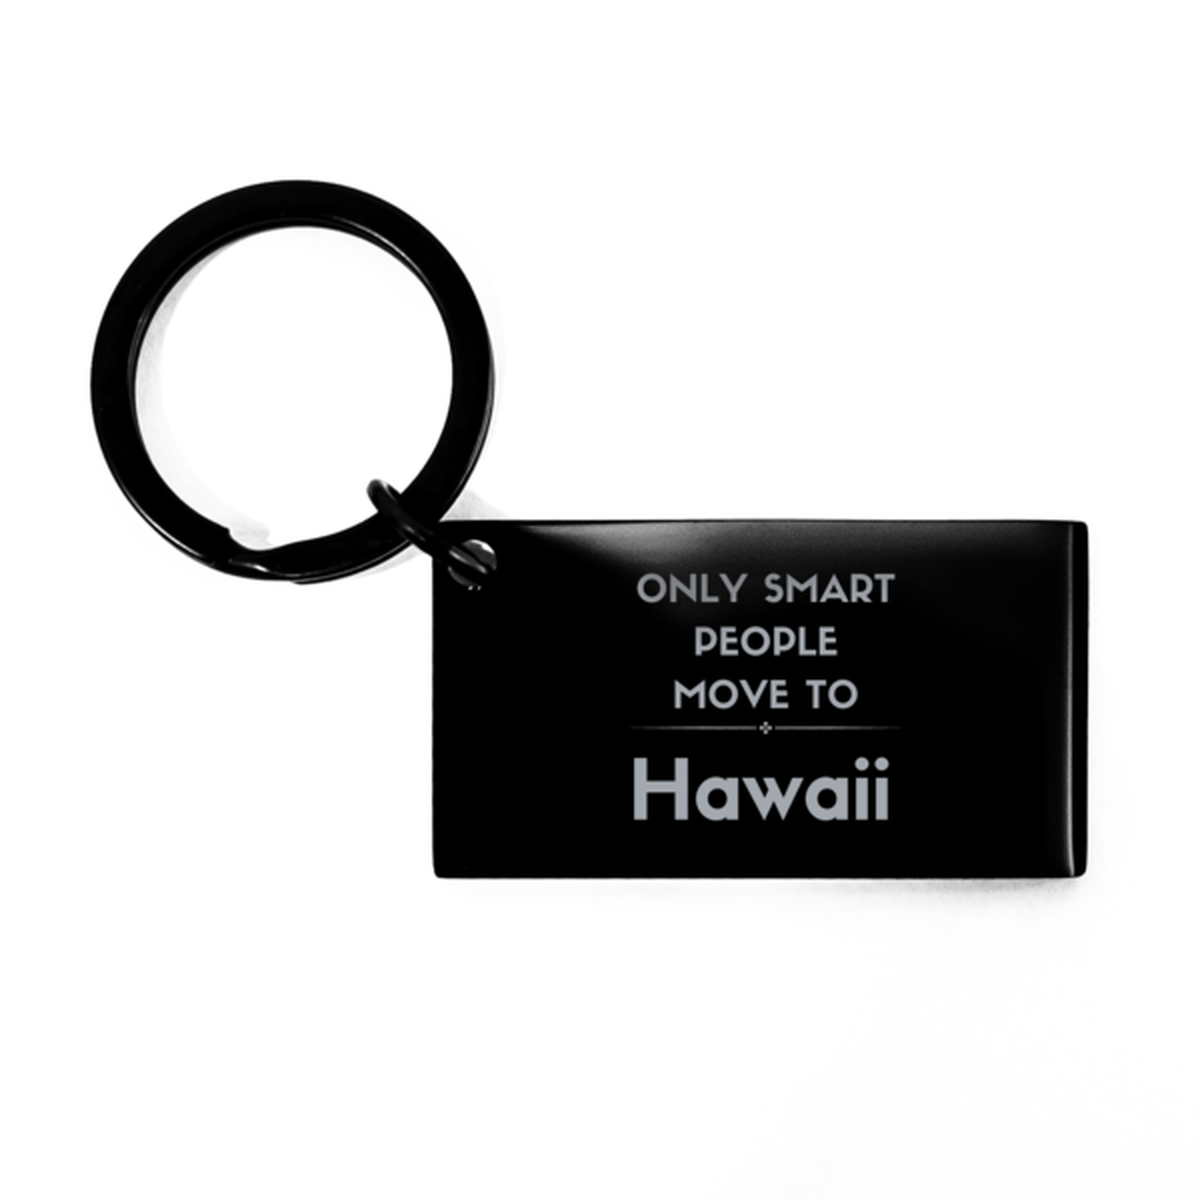 Only smart people move to Hawaii Keychain, Gag Gifts For Hawaii, Move to Hawaii Gifts for Friends Coworker Funny Saying Quote